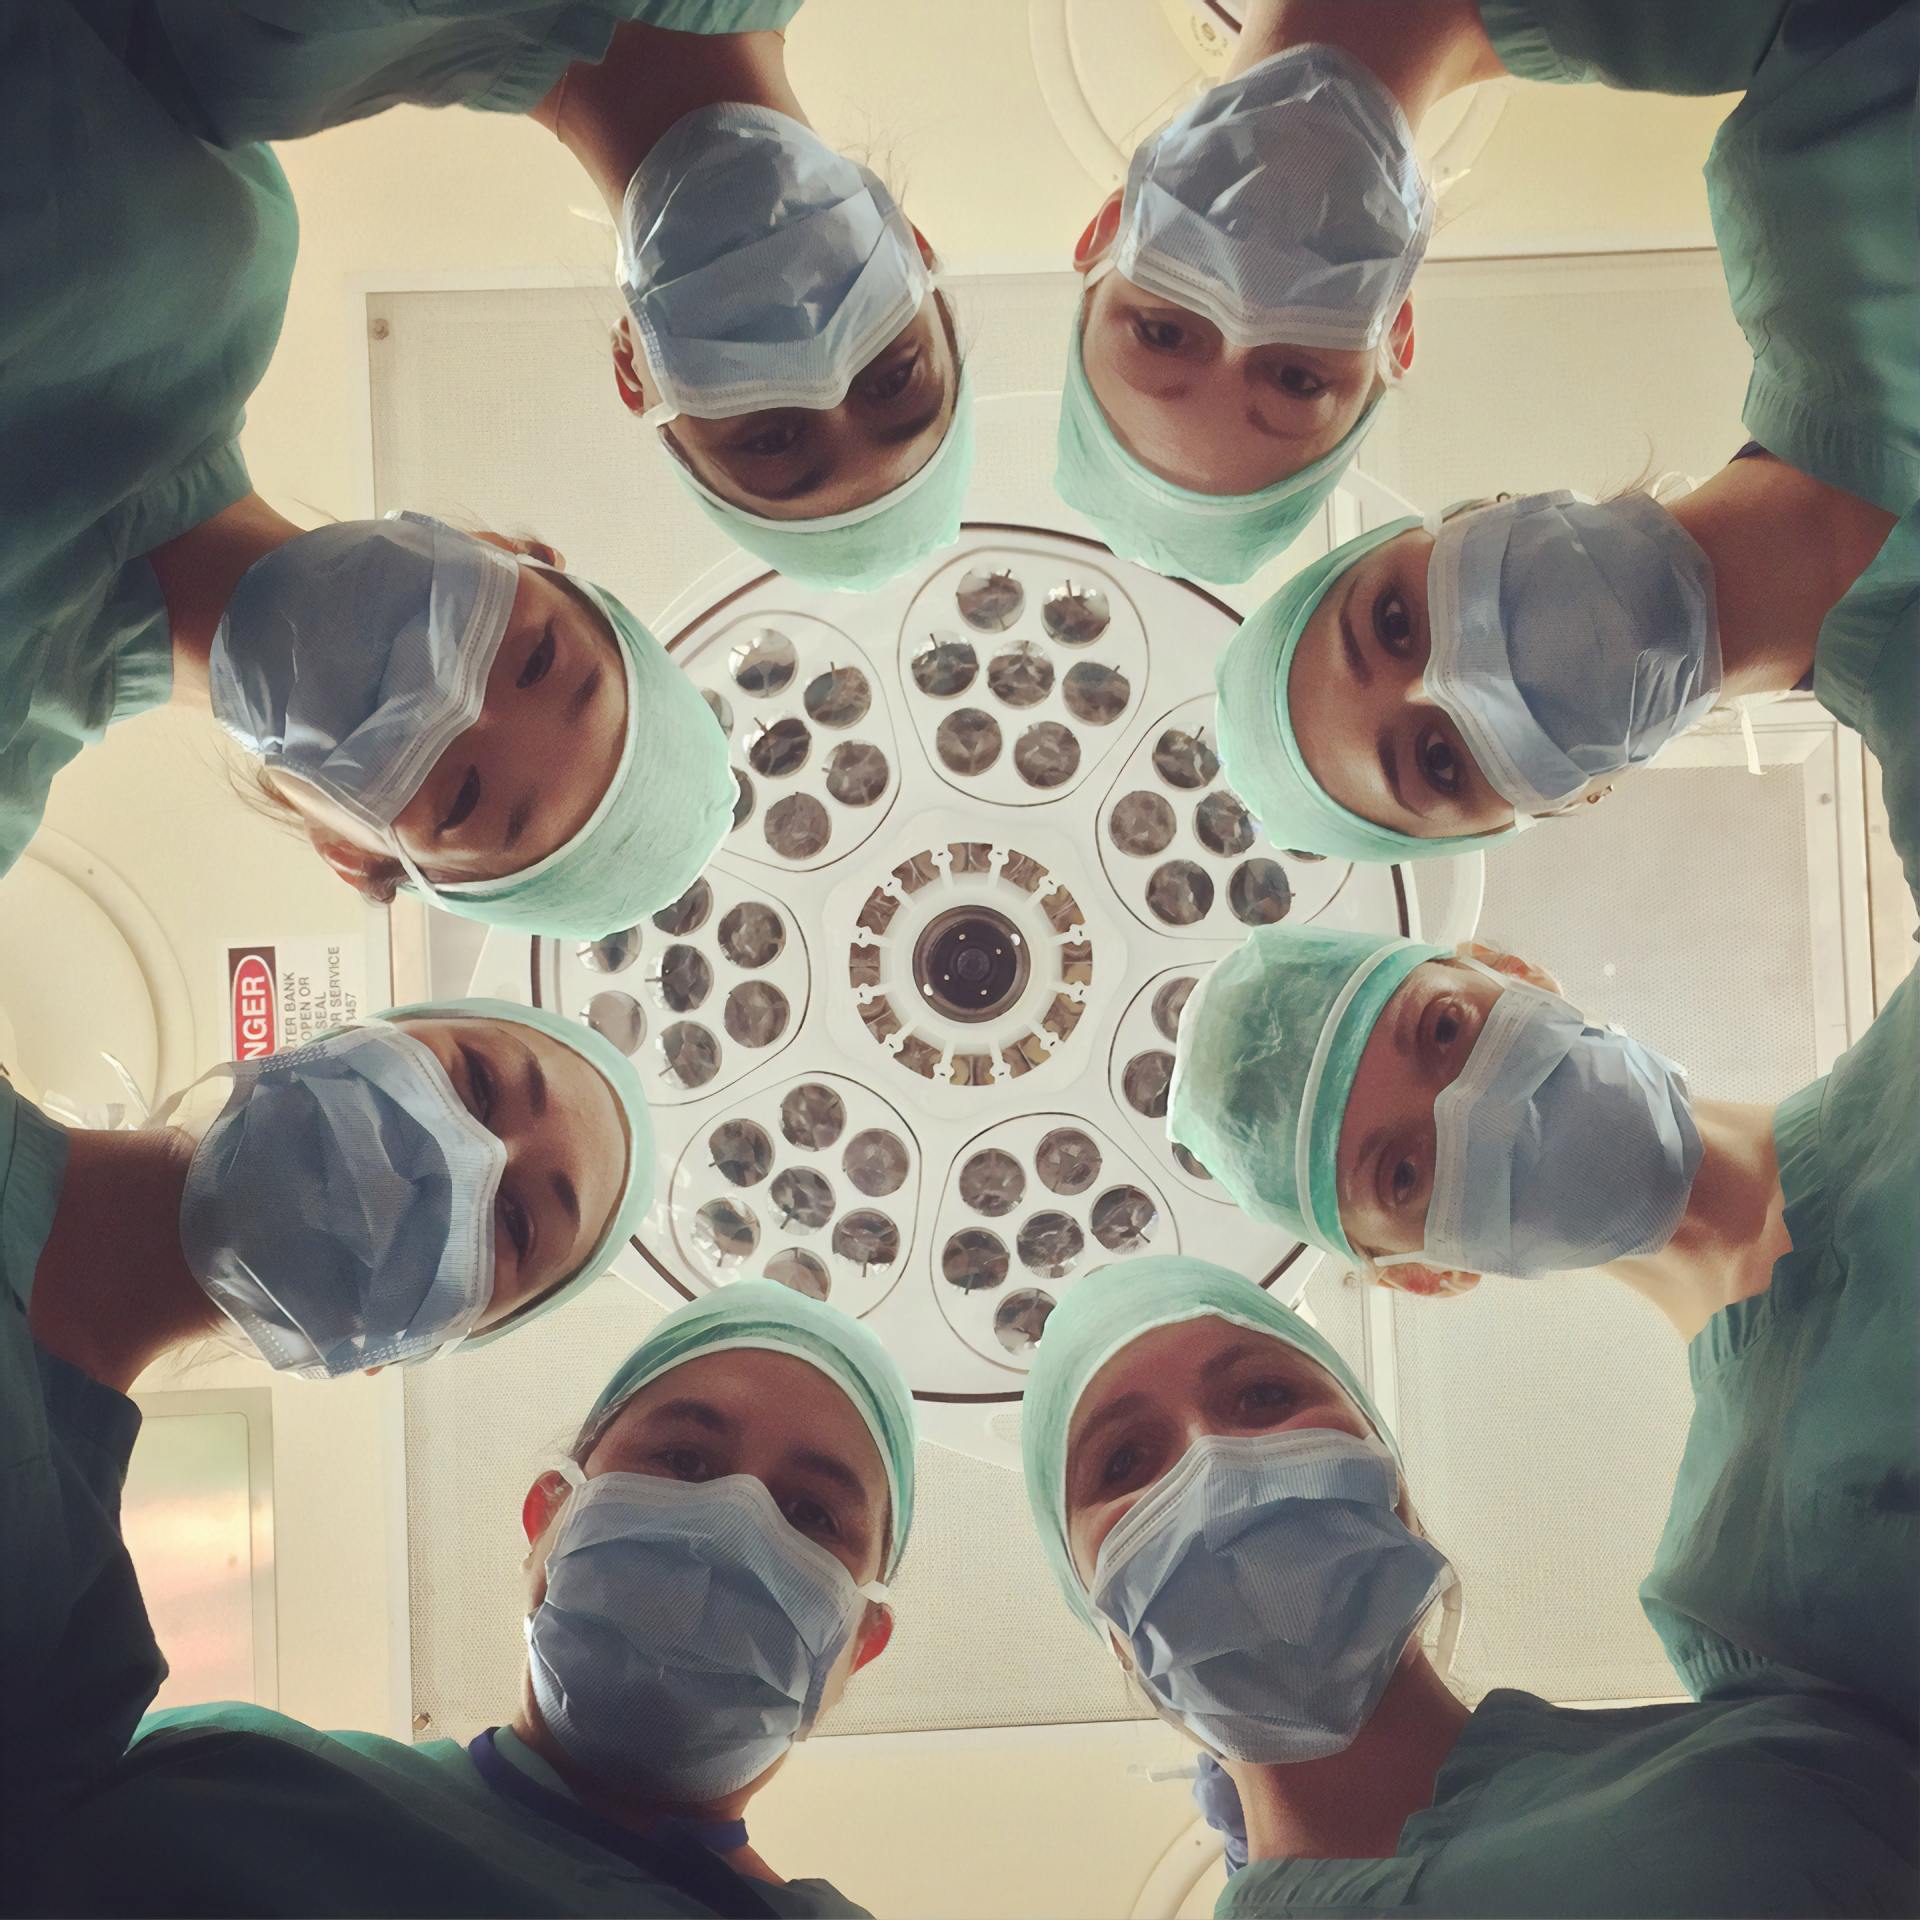 group of doctors with face masks looking down at patient on operating table